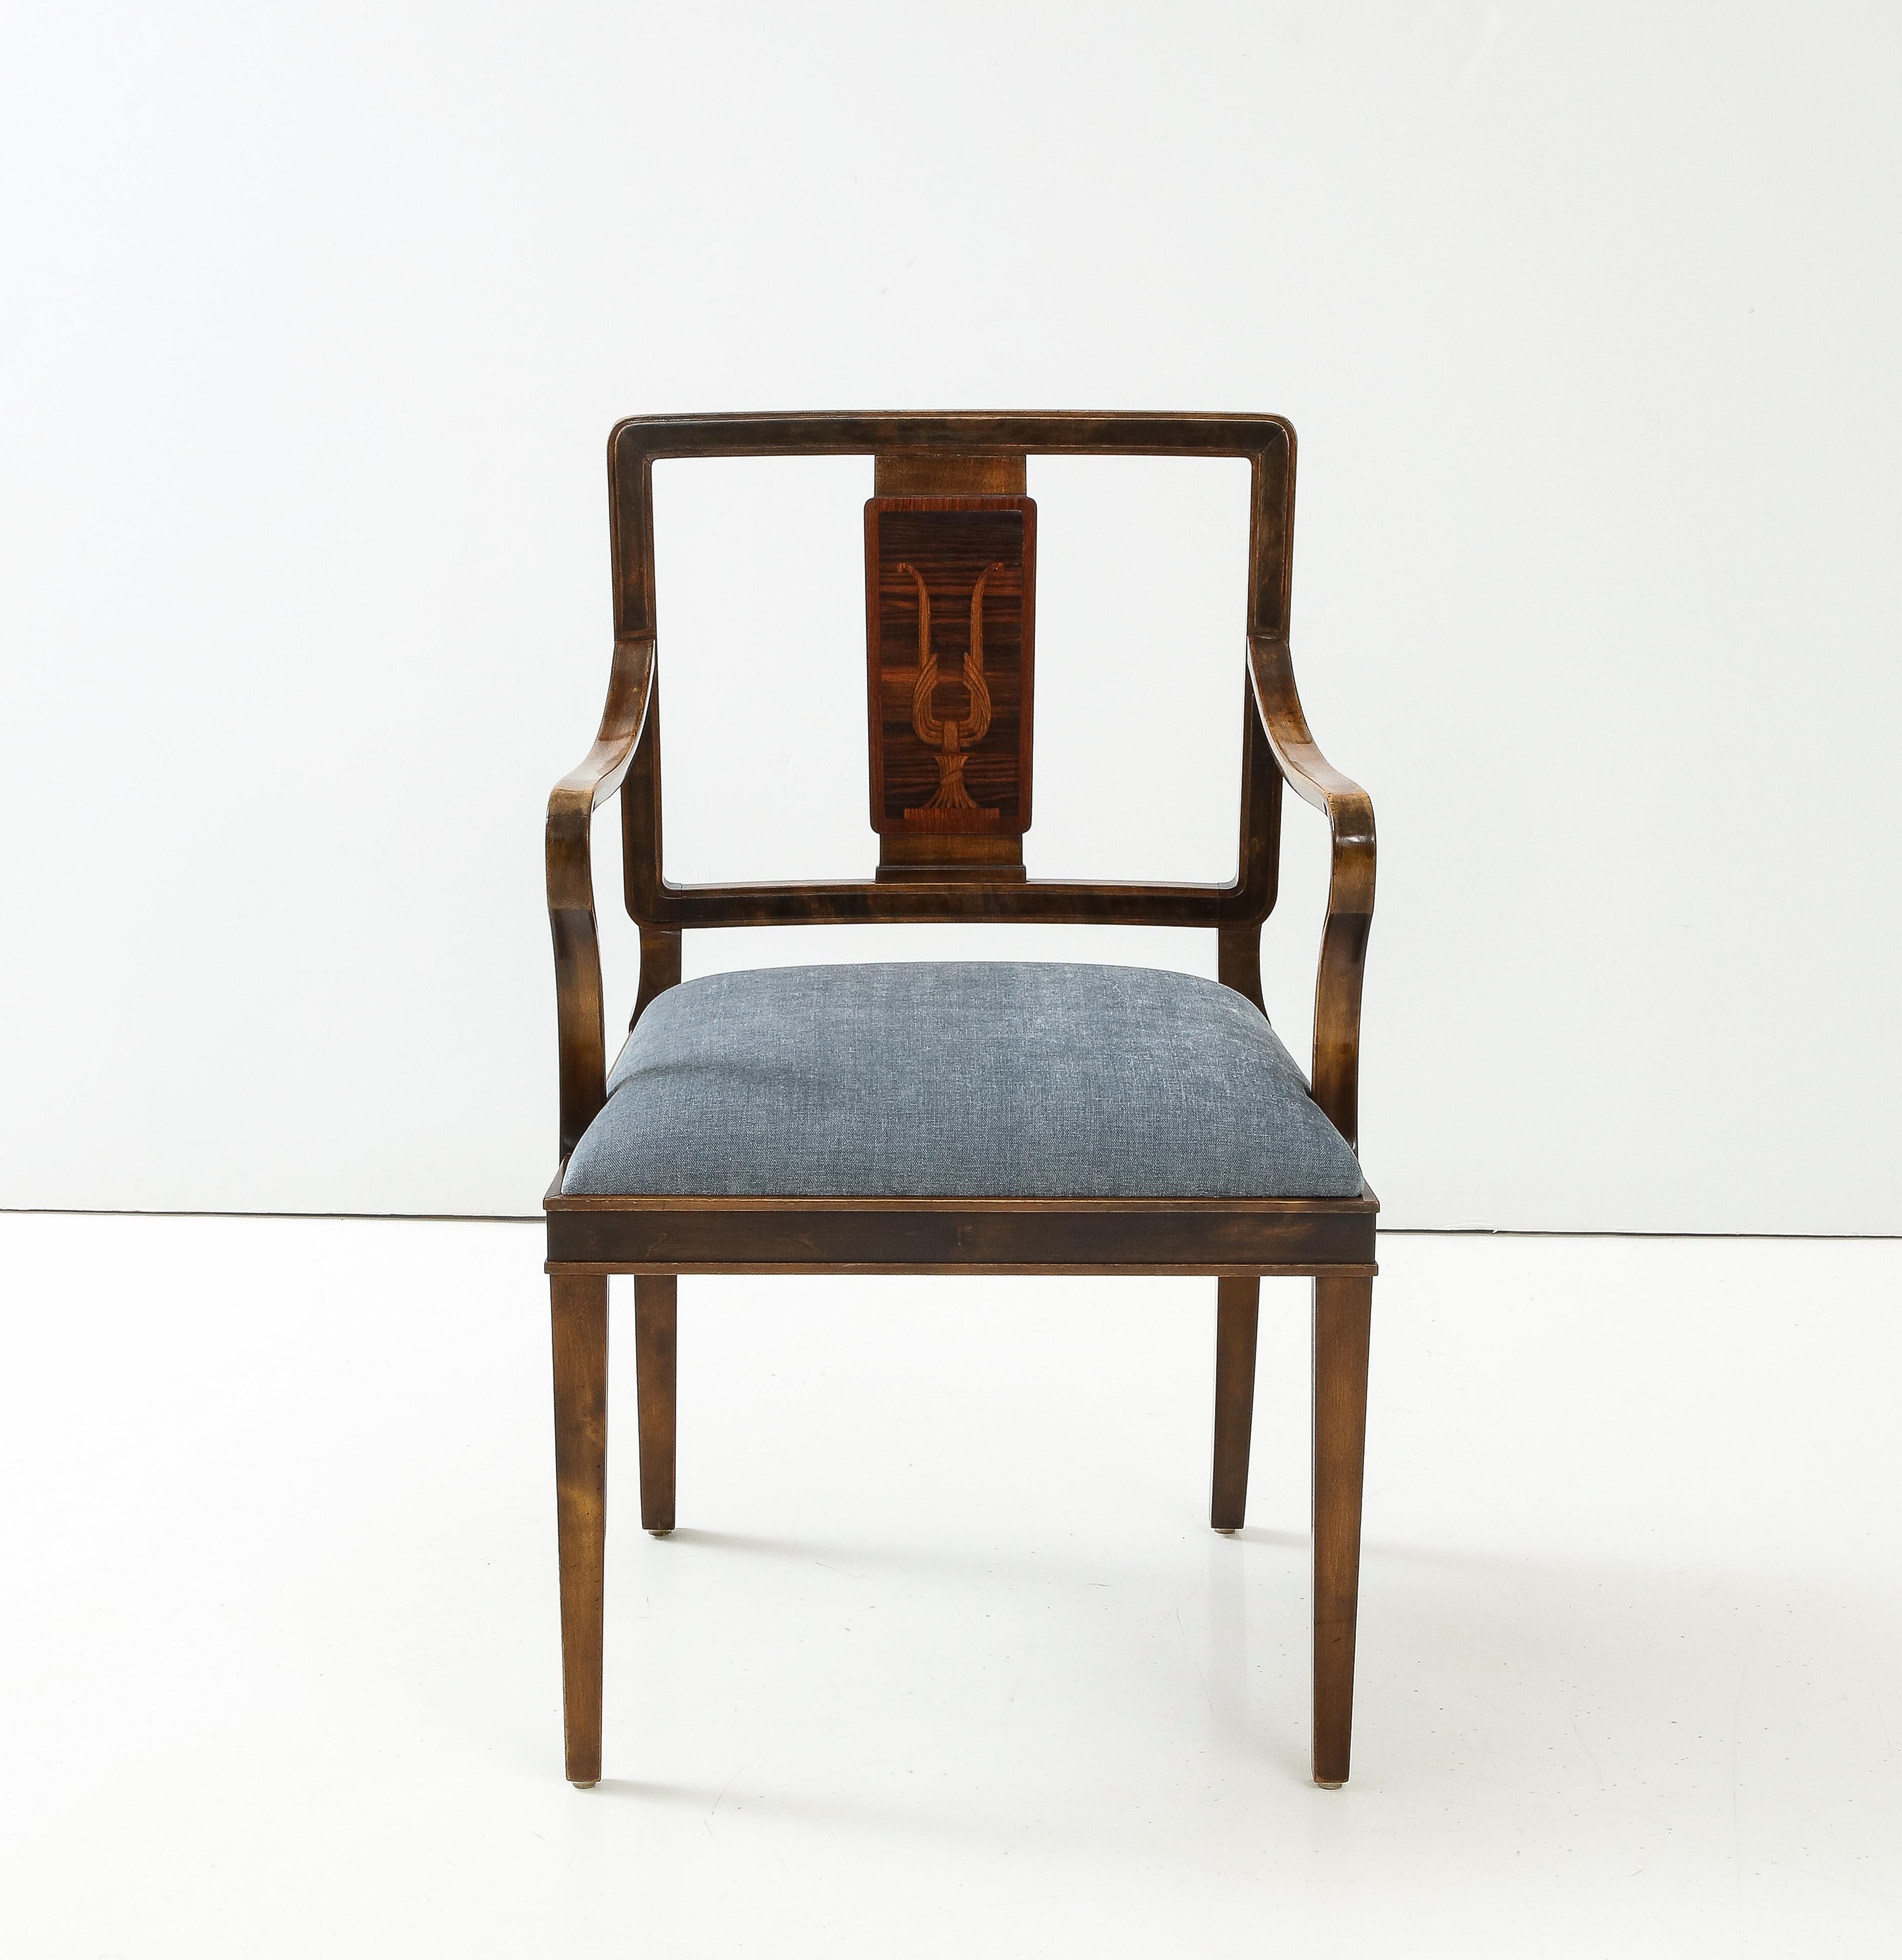 A Swedish Grace stained birch and inlaid open armchair, circa 1940s, probably designed by Carl Malmsten, with open rectangular backrests centered with neoclassical inspired inlaid back plat, curved armrests, drop-in upholstered seats, raised on